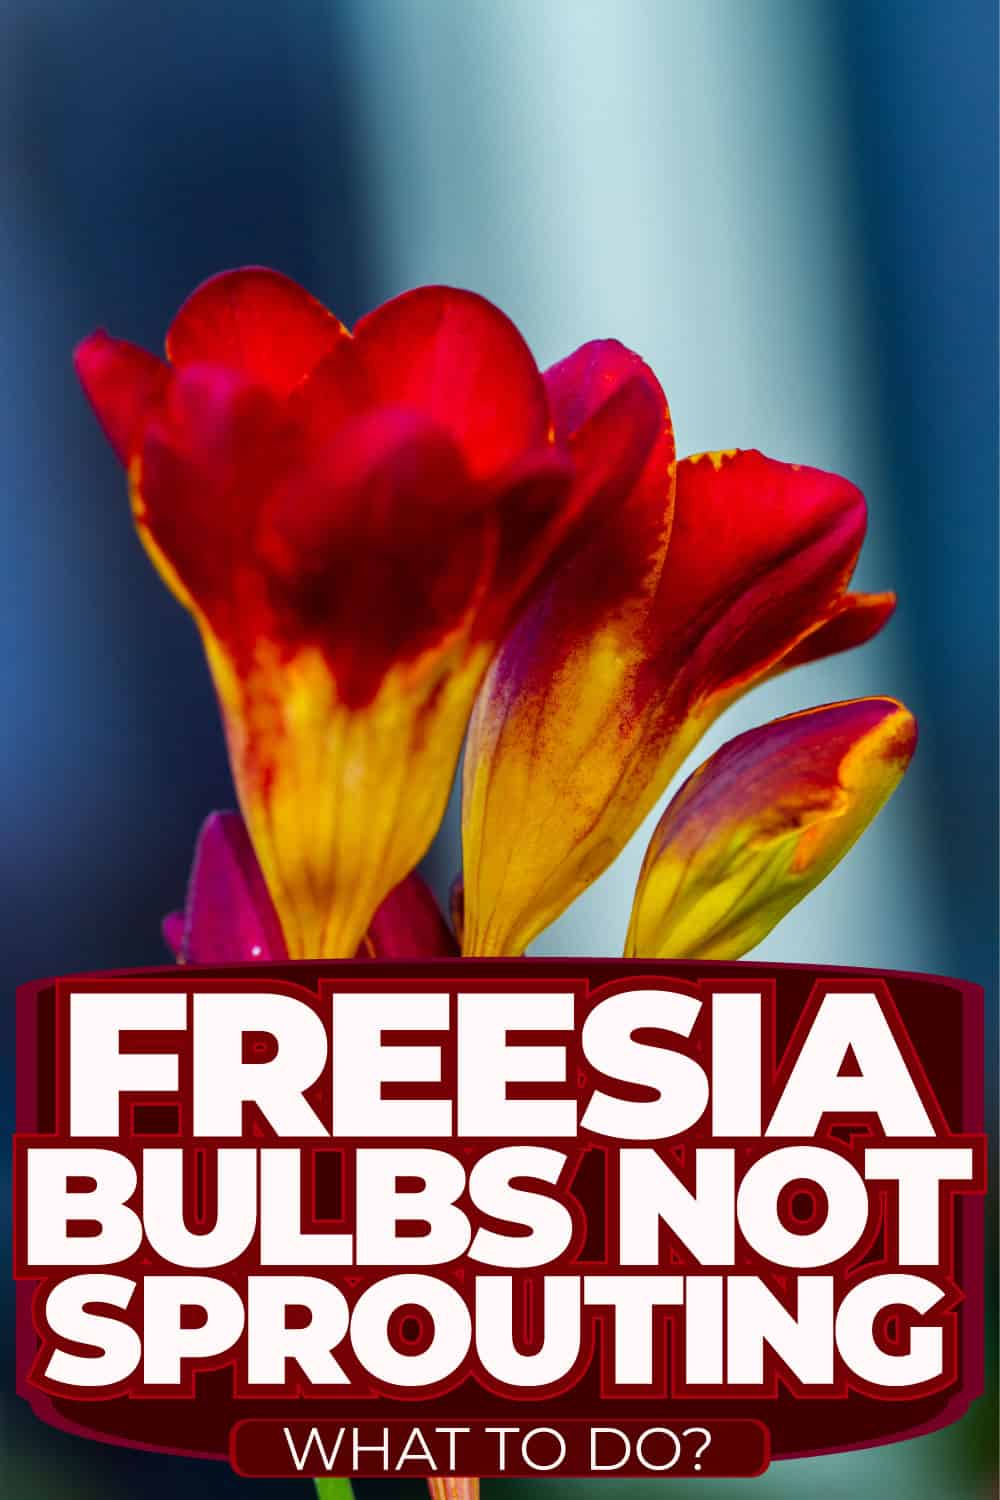 Freesia Bulbs Not Sprouting - What To Do